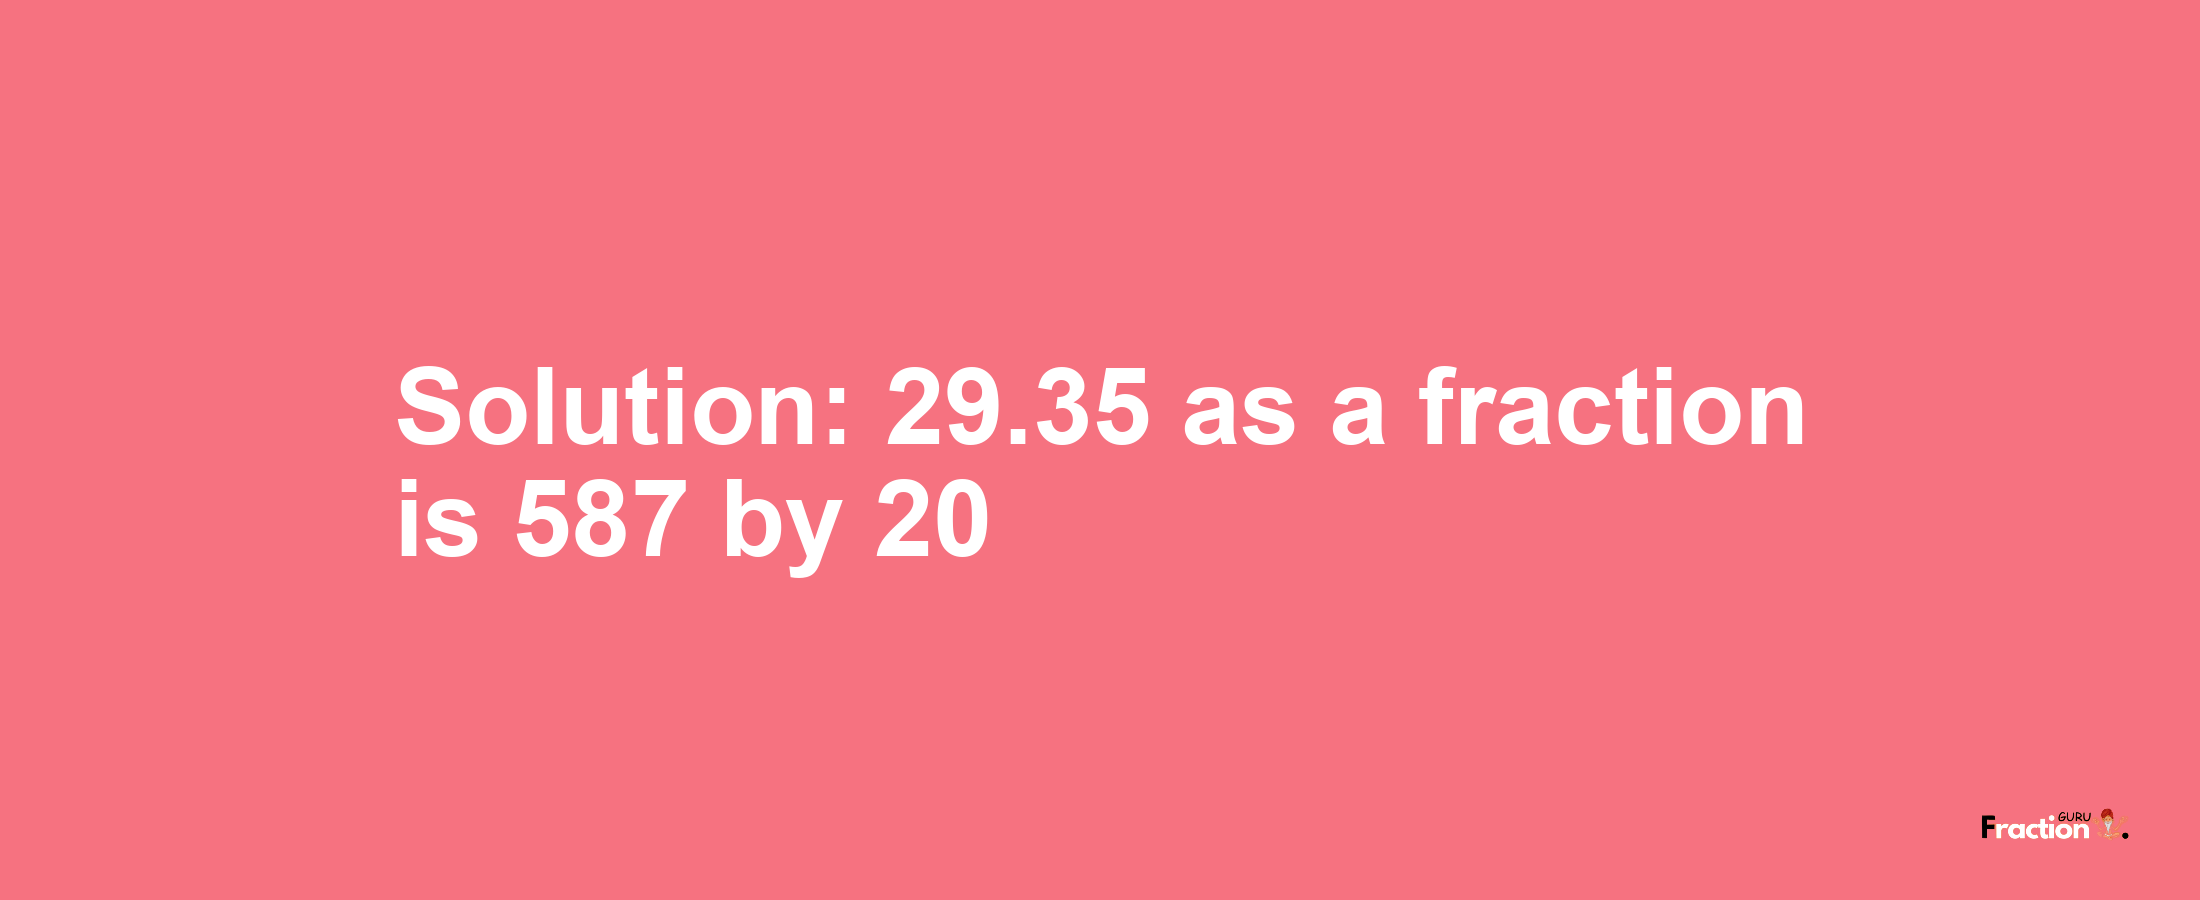 Solution:29.35 as a fraction is 587/20